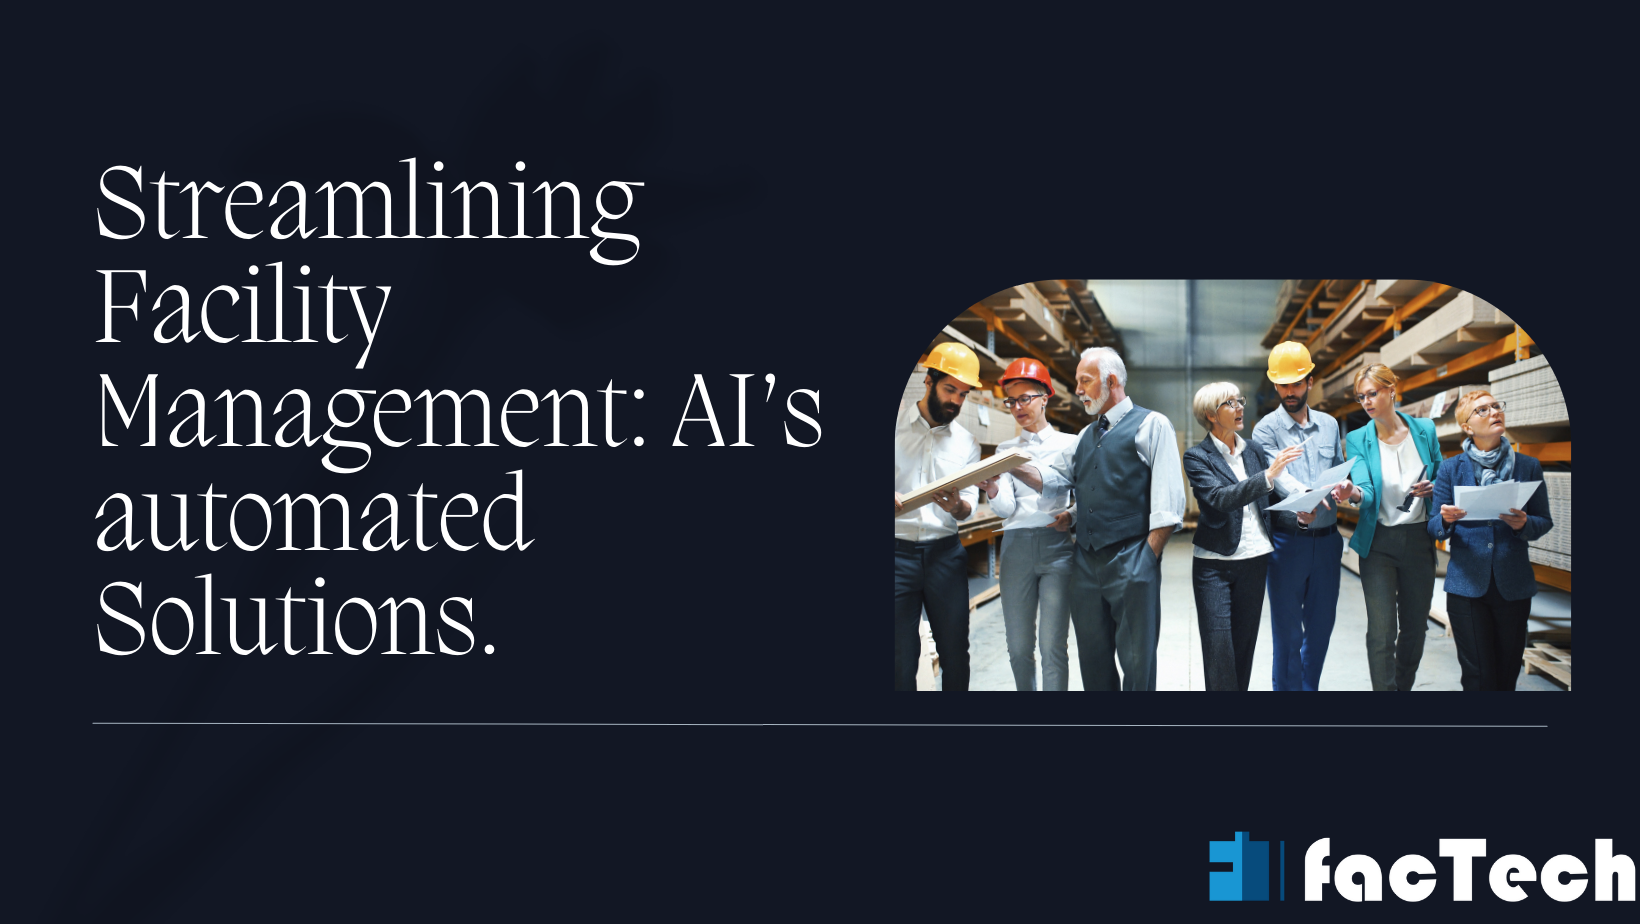 Streamlining Facility Management AI’s automated Solutions.